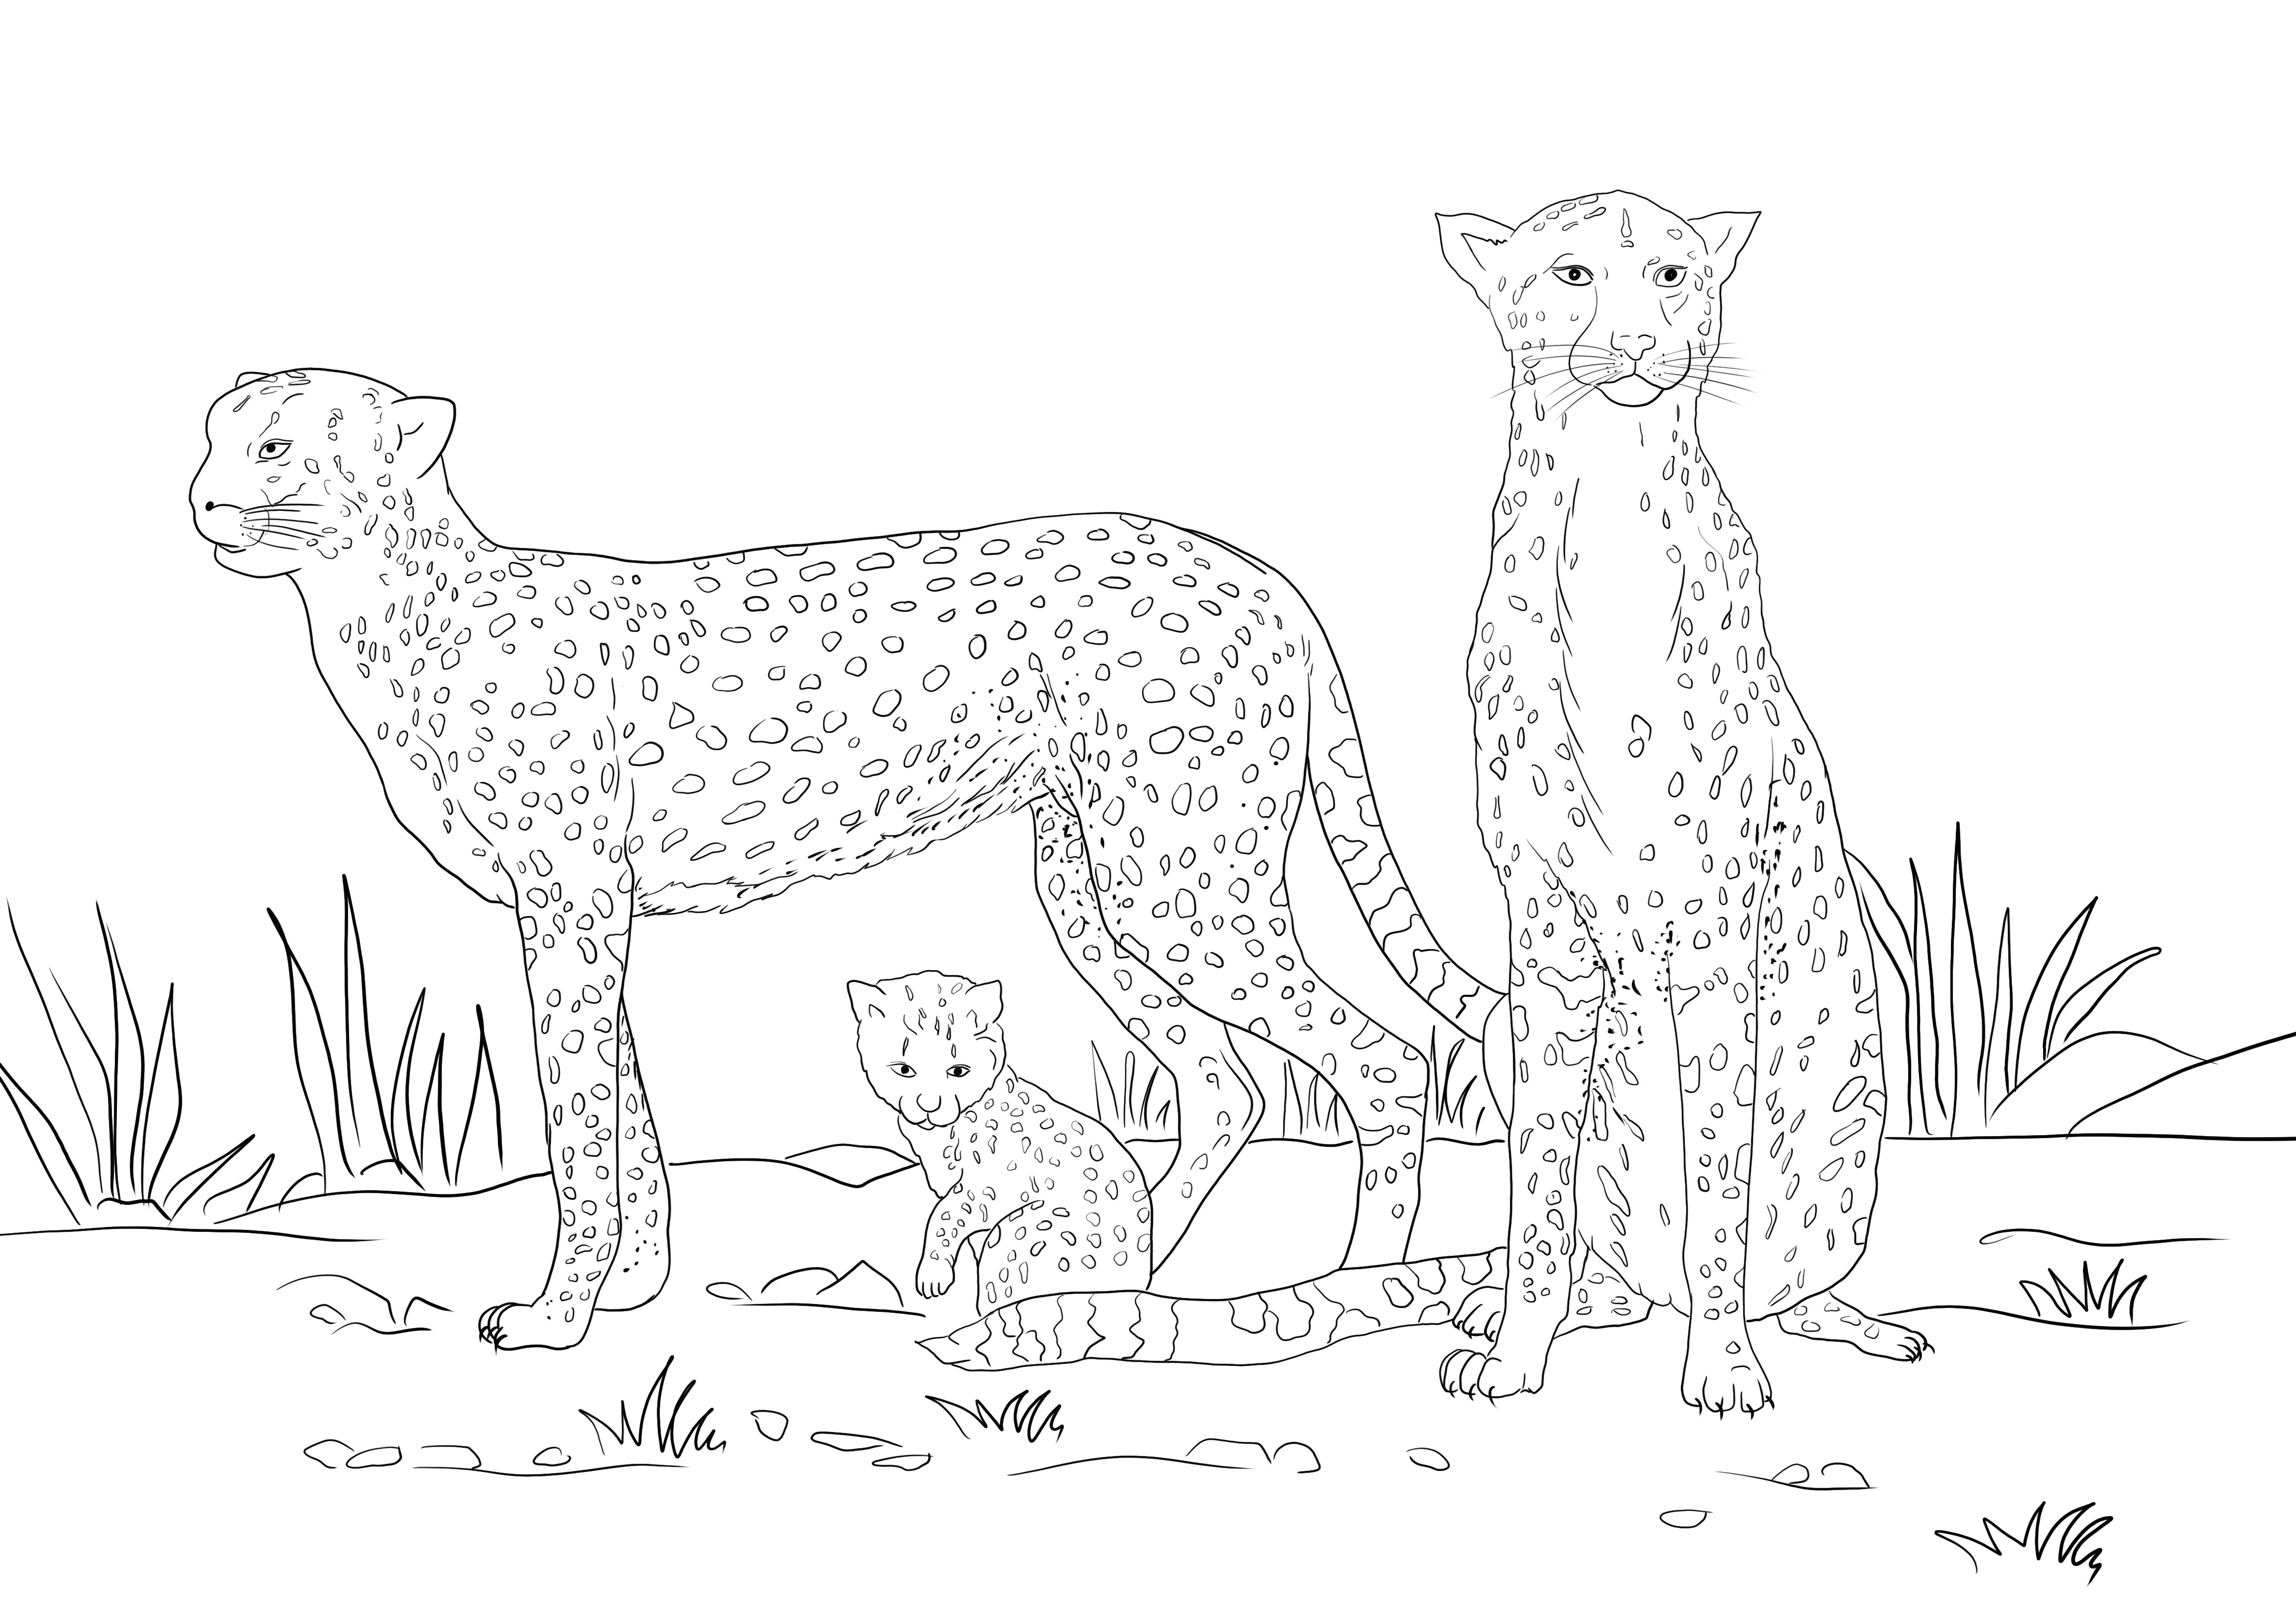 Here is a free resource of coloring images of a Cheetah family free to print